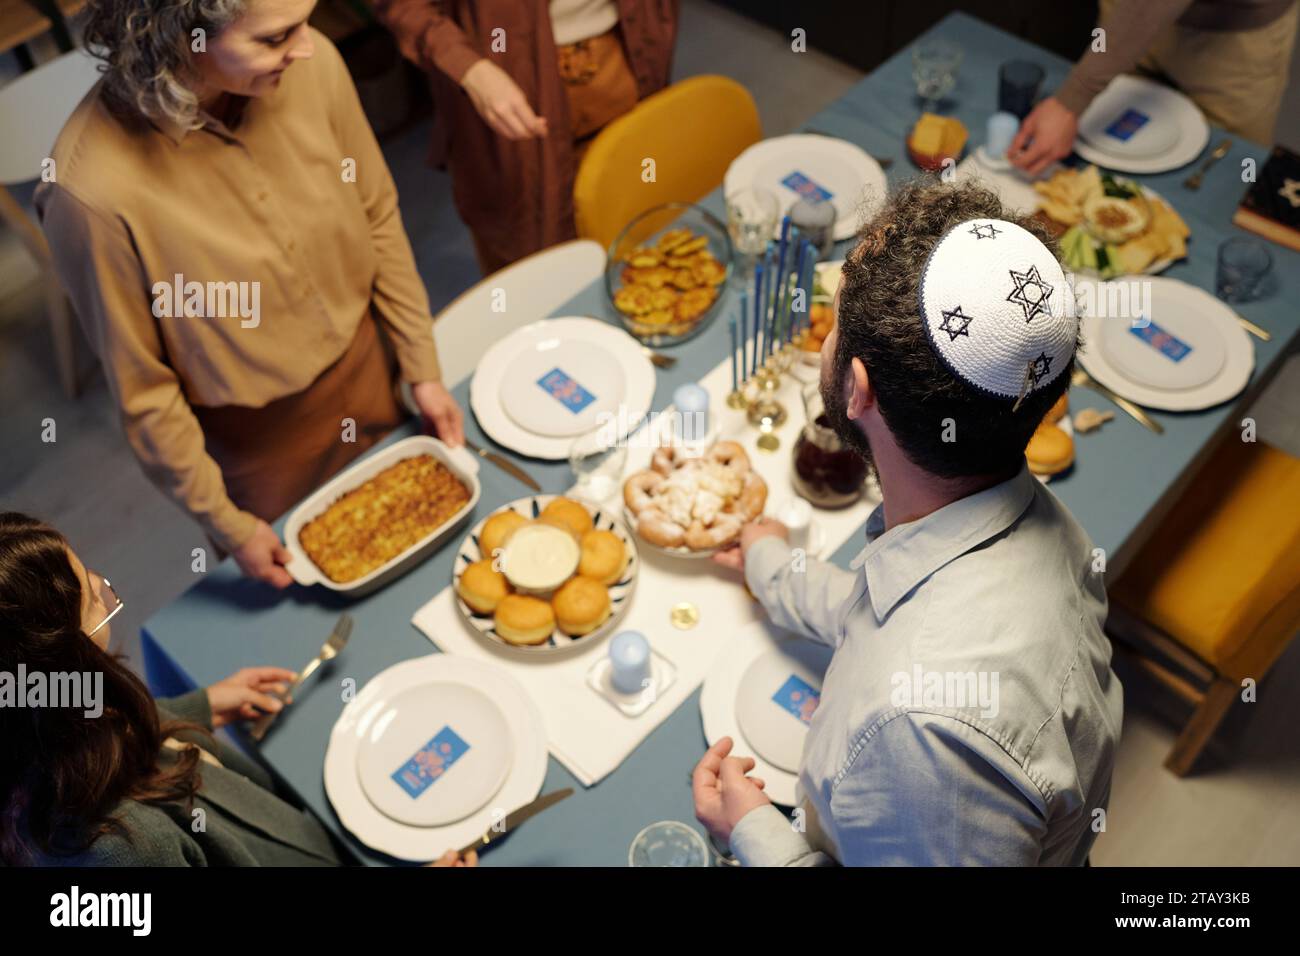 High angle of Jewish man wearing white kippah with embroidered star of David putting plate with homemade snack on served table Stock Photo